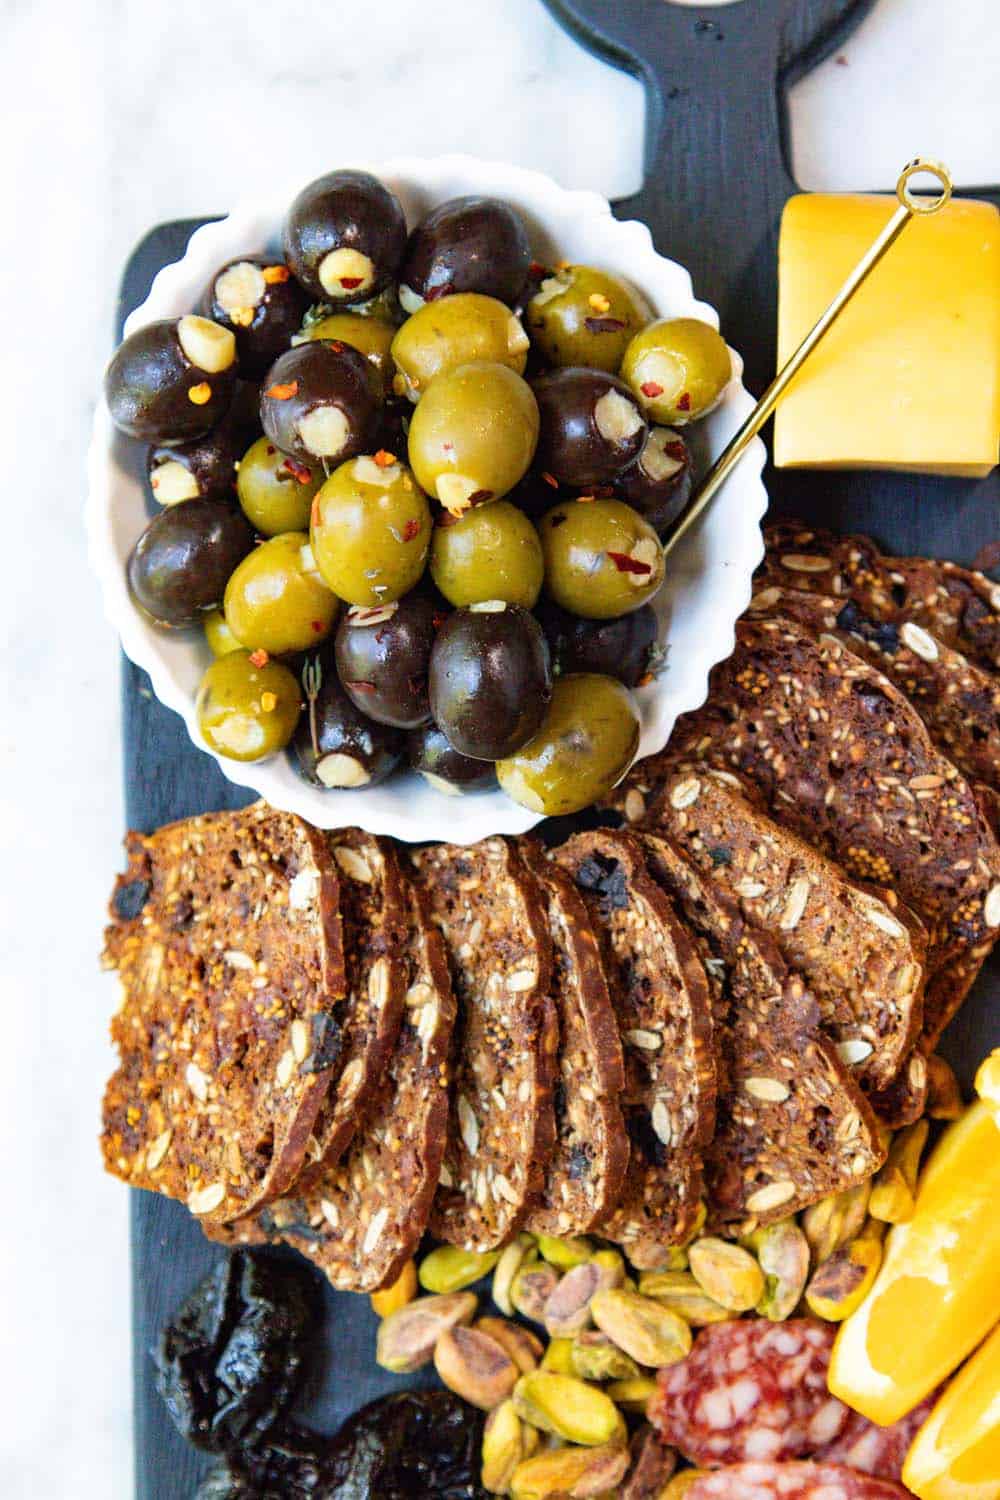 Stuffed olives and raisin crackers on a cheese board.